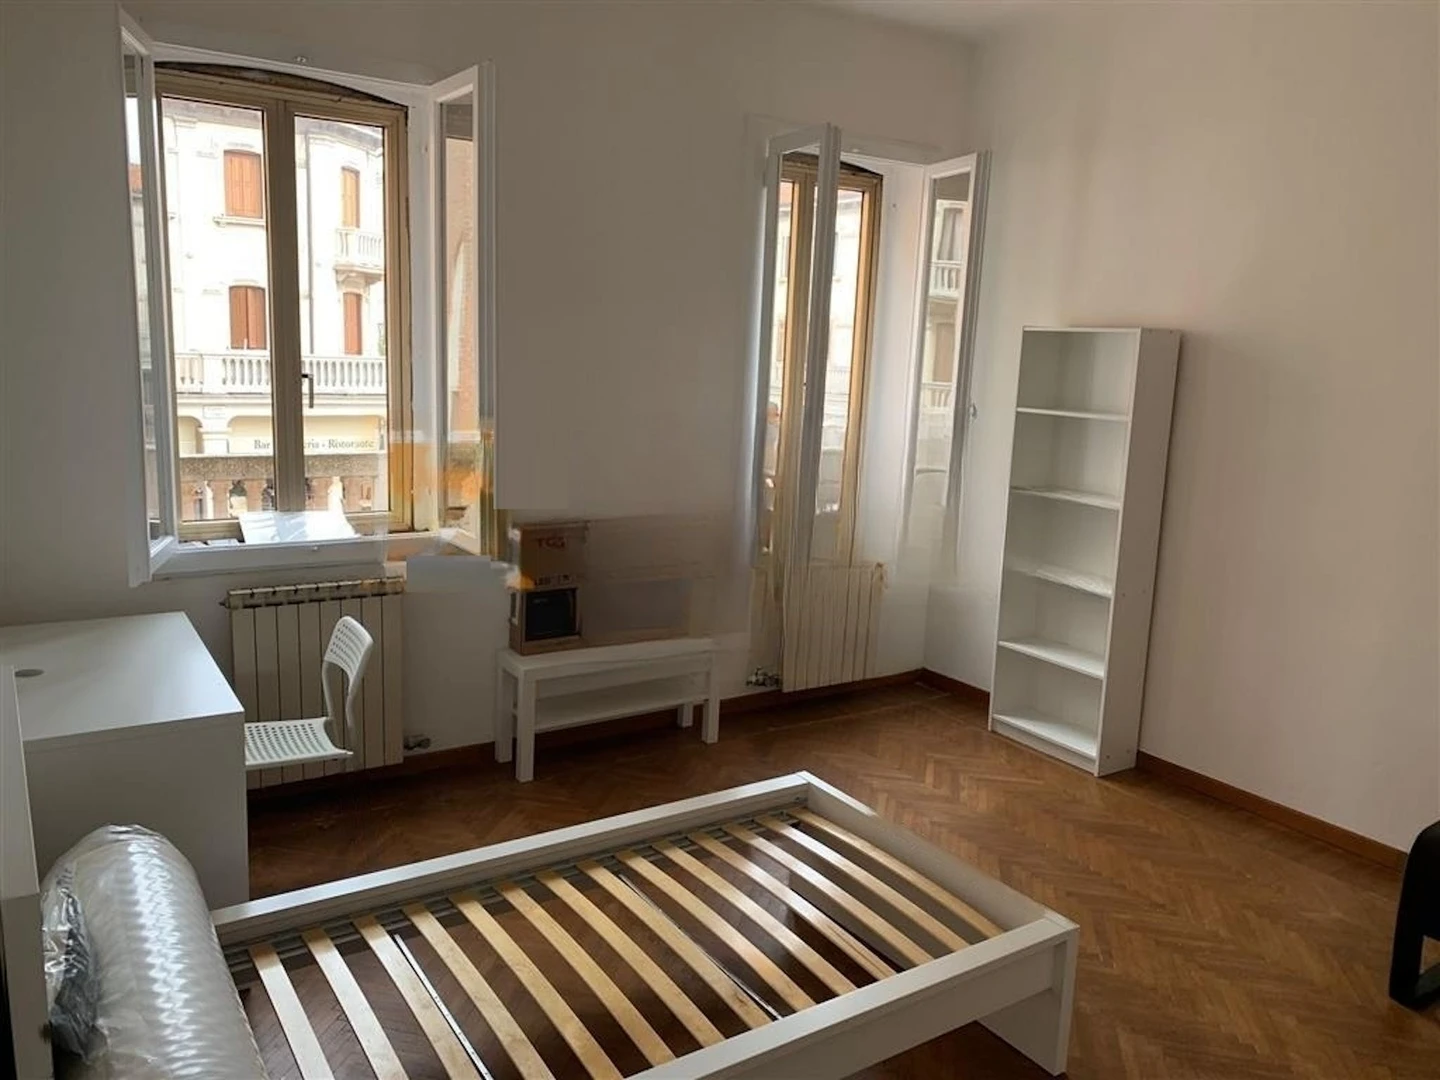 Room for rent in a shared flat in Venezia